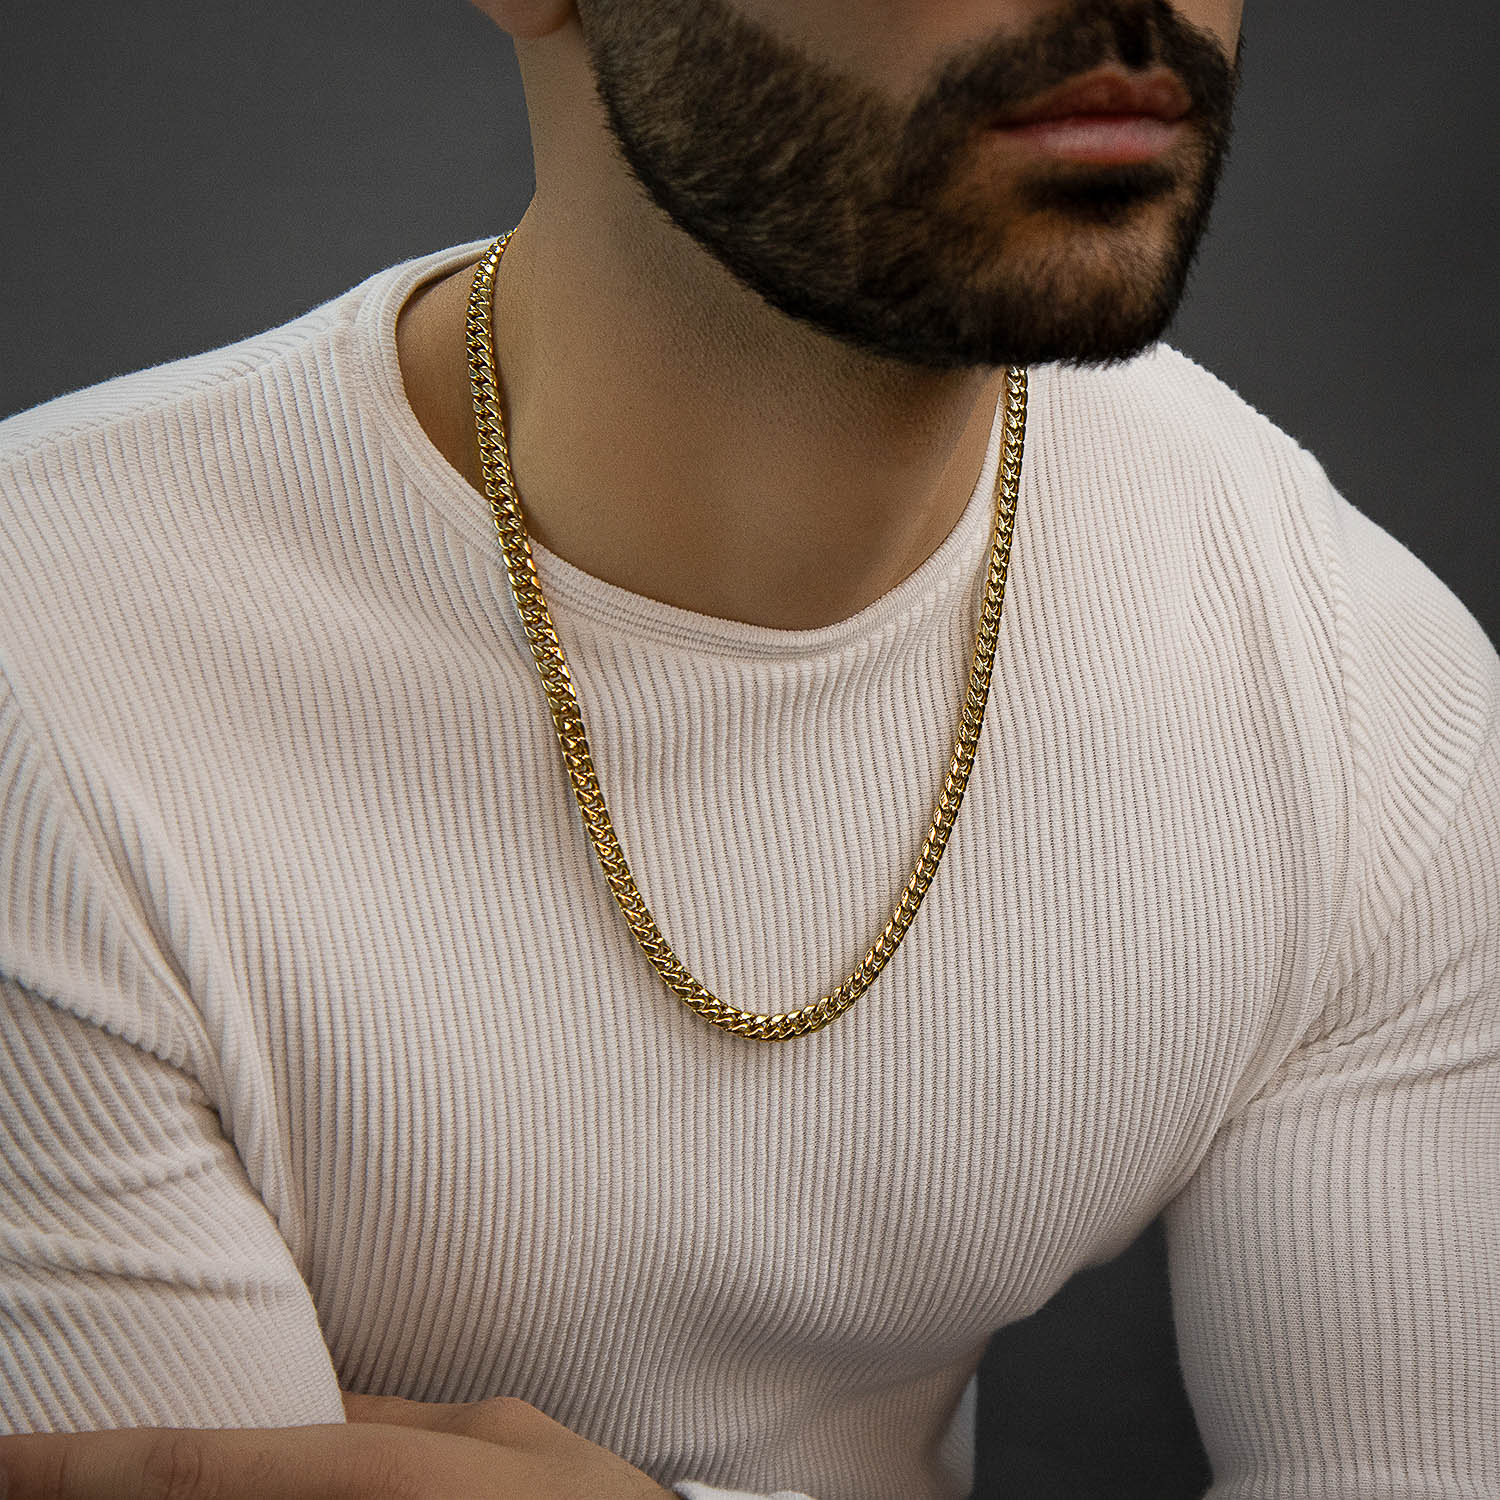 Solid Large Miami Cuban Link Chains (7mm, 8mm) - Donj Jewellery